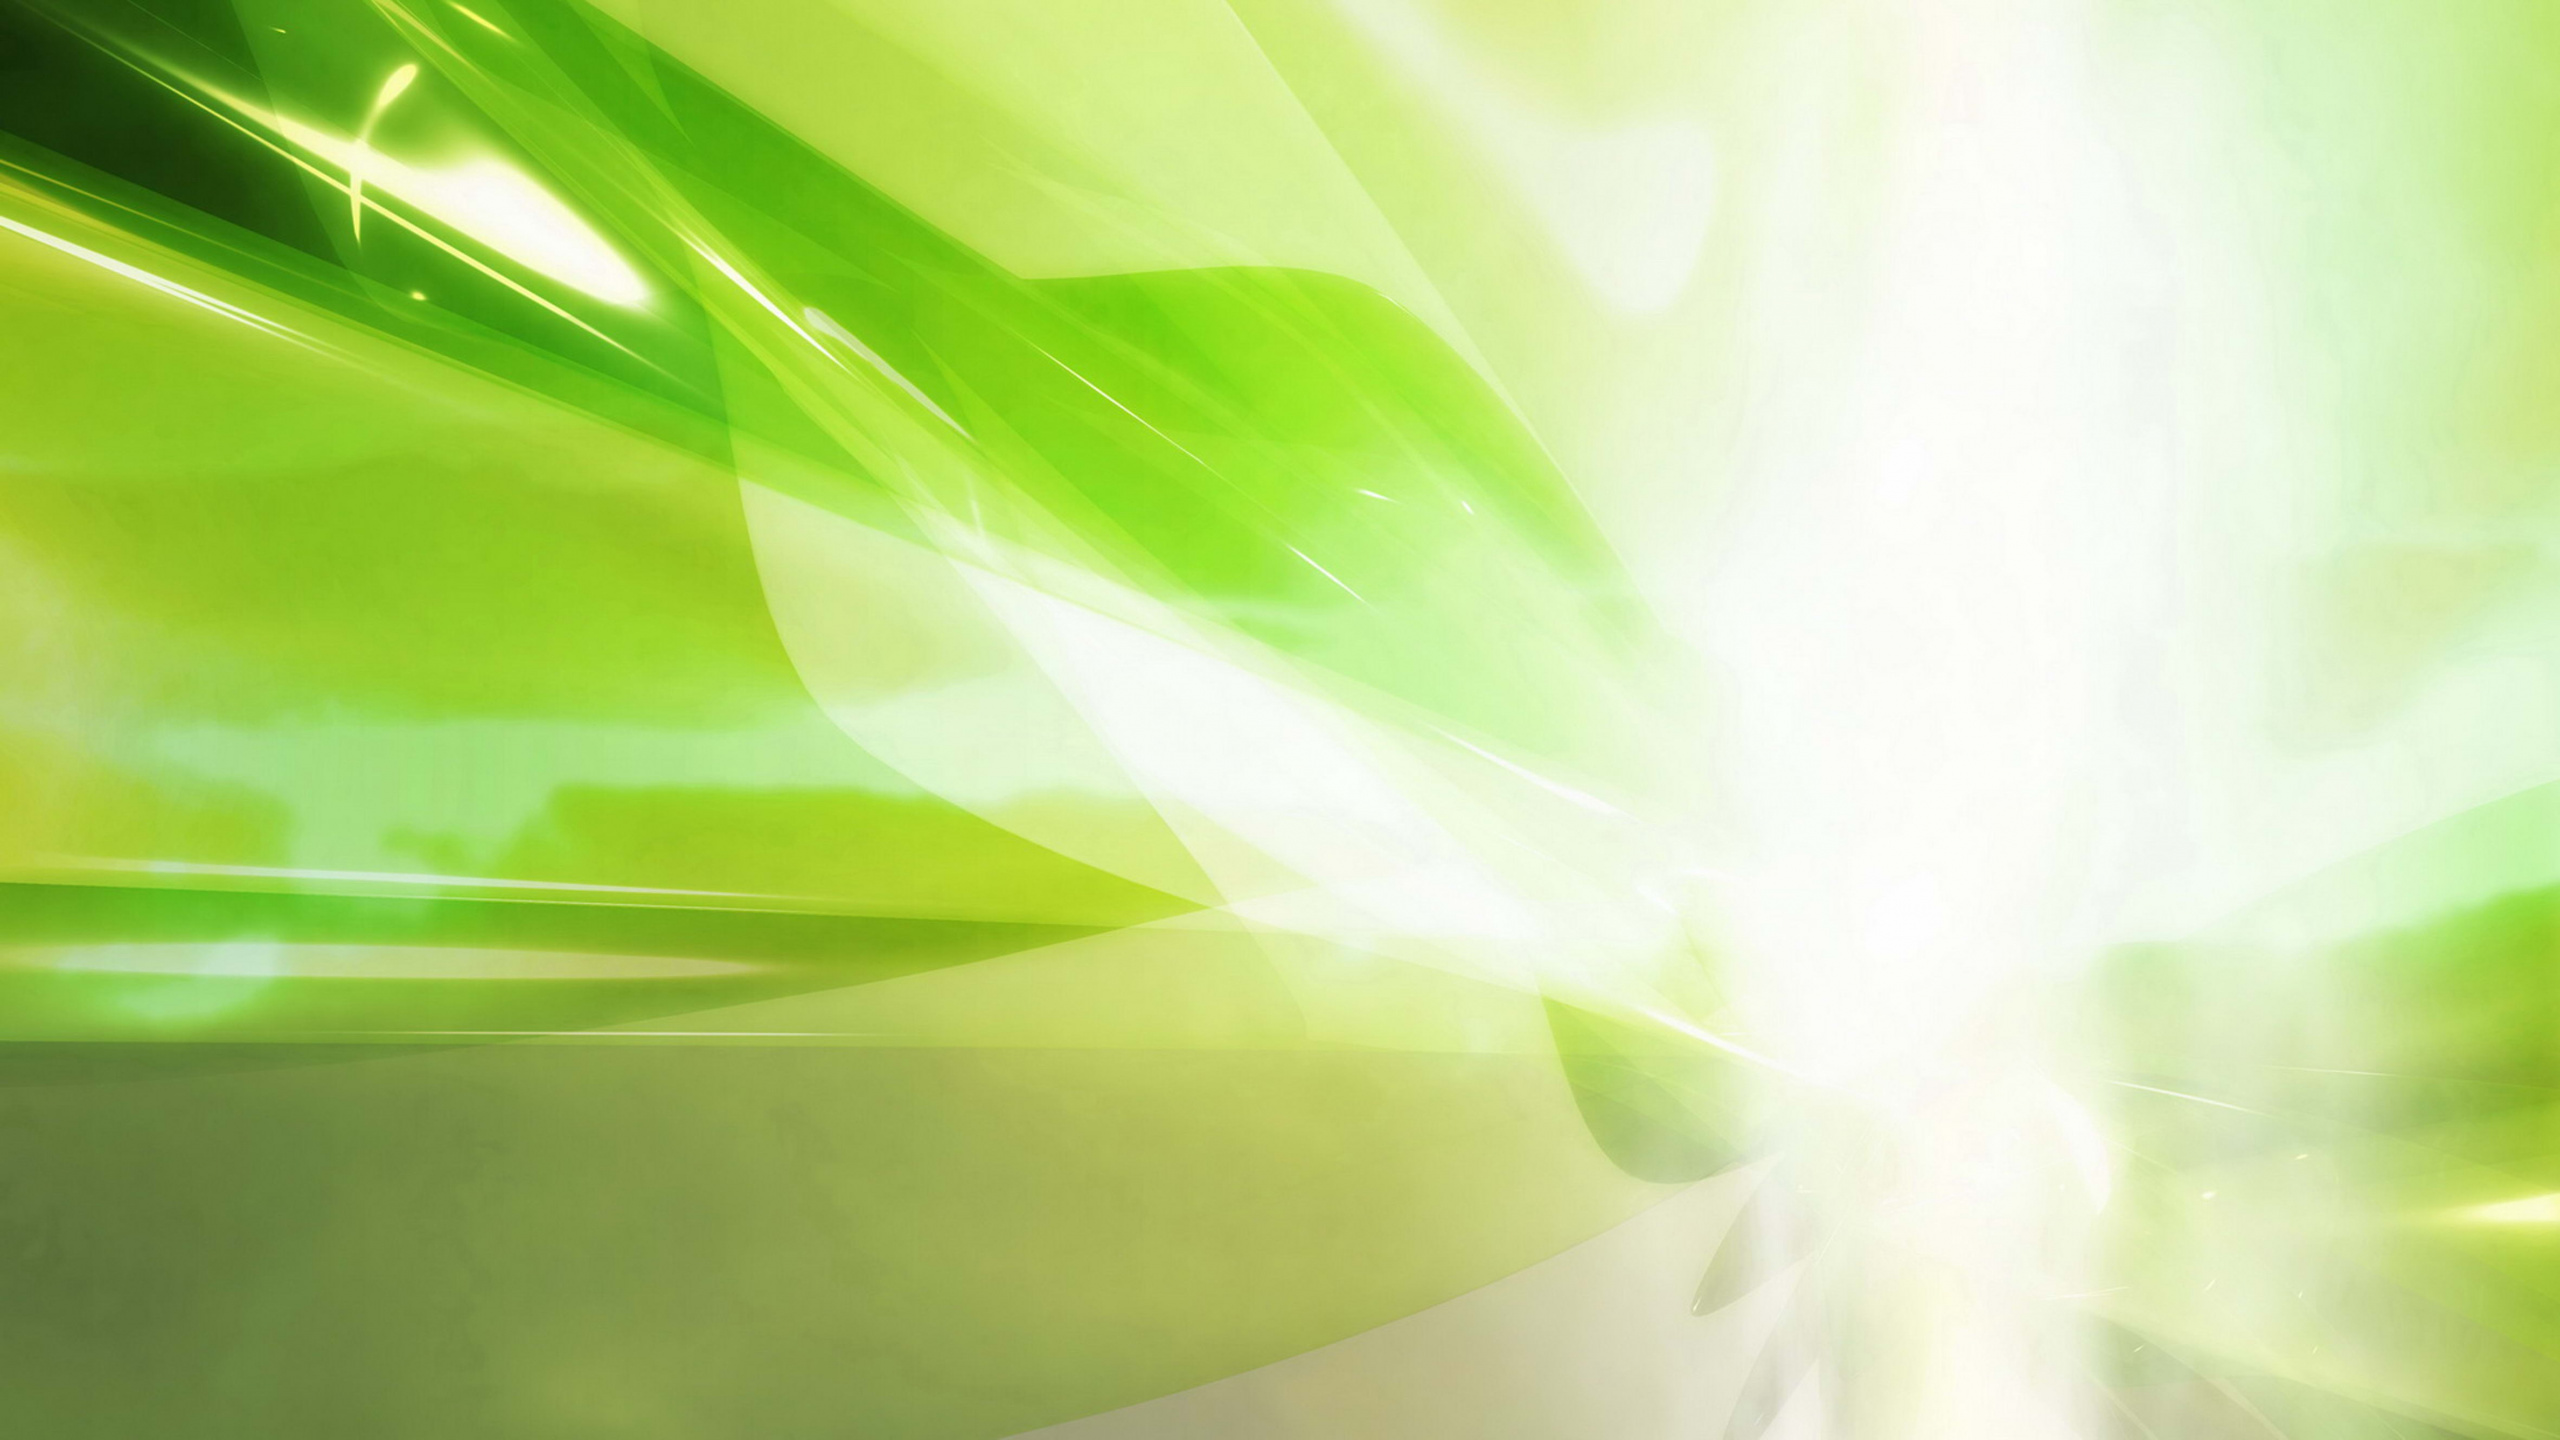 Green and White Abstract Painting. Wallpaper in 2560x1440 Resolution